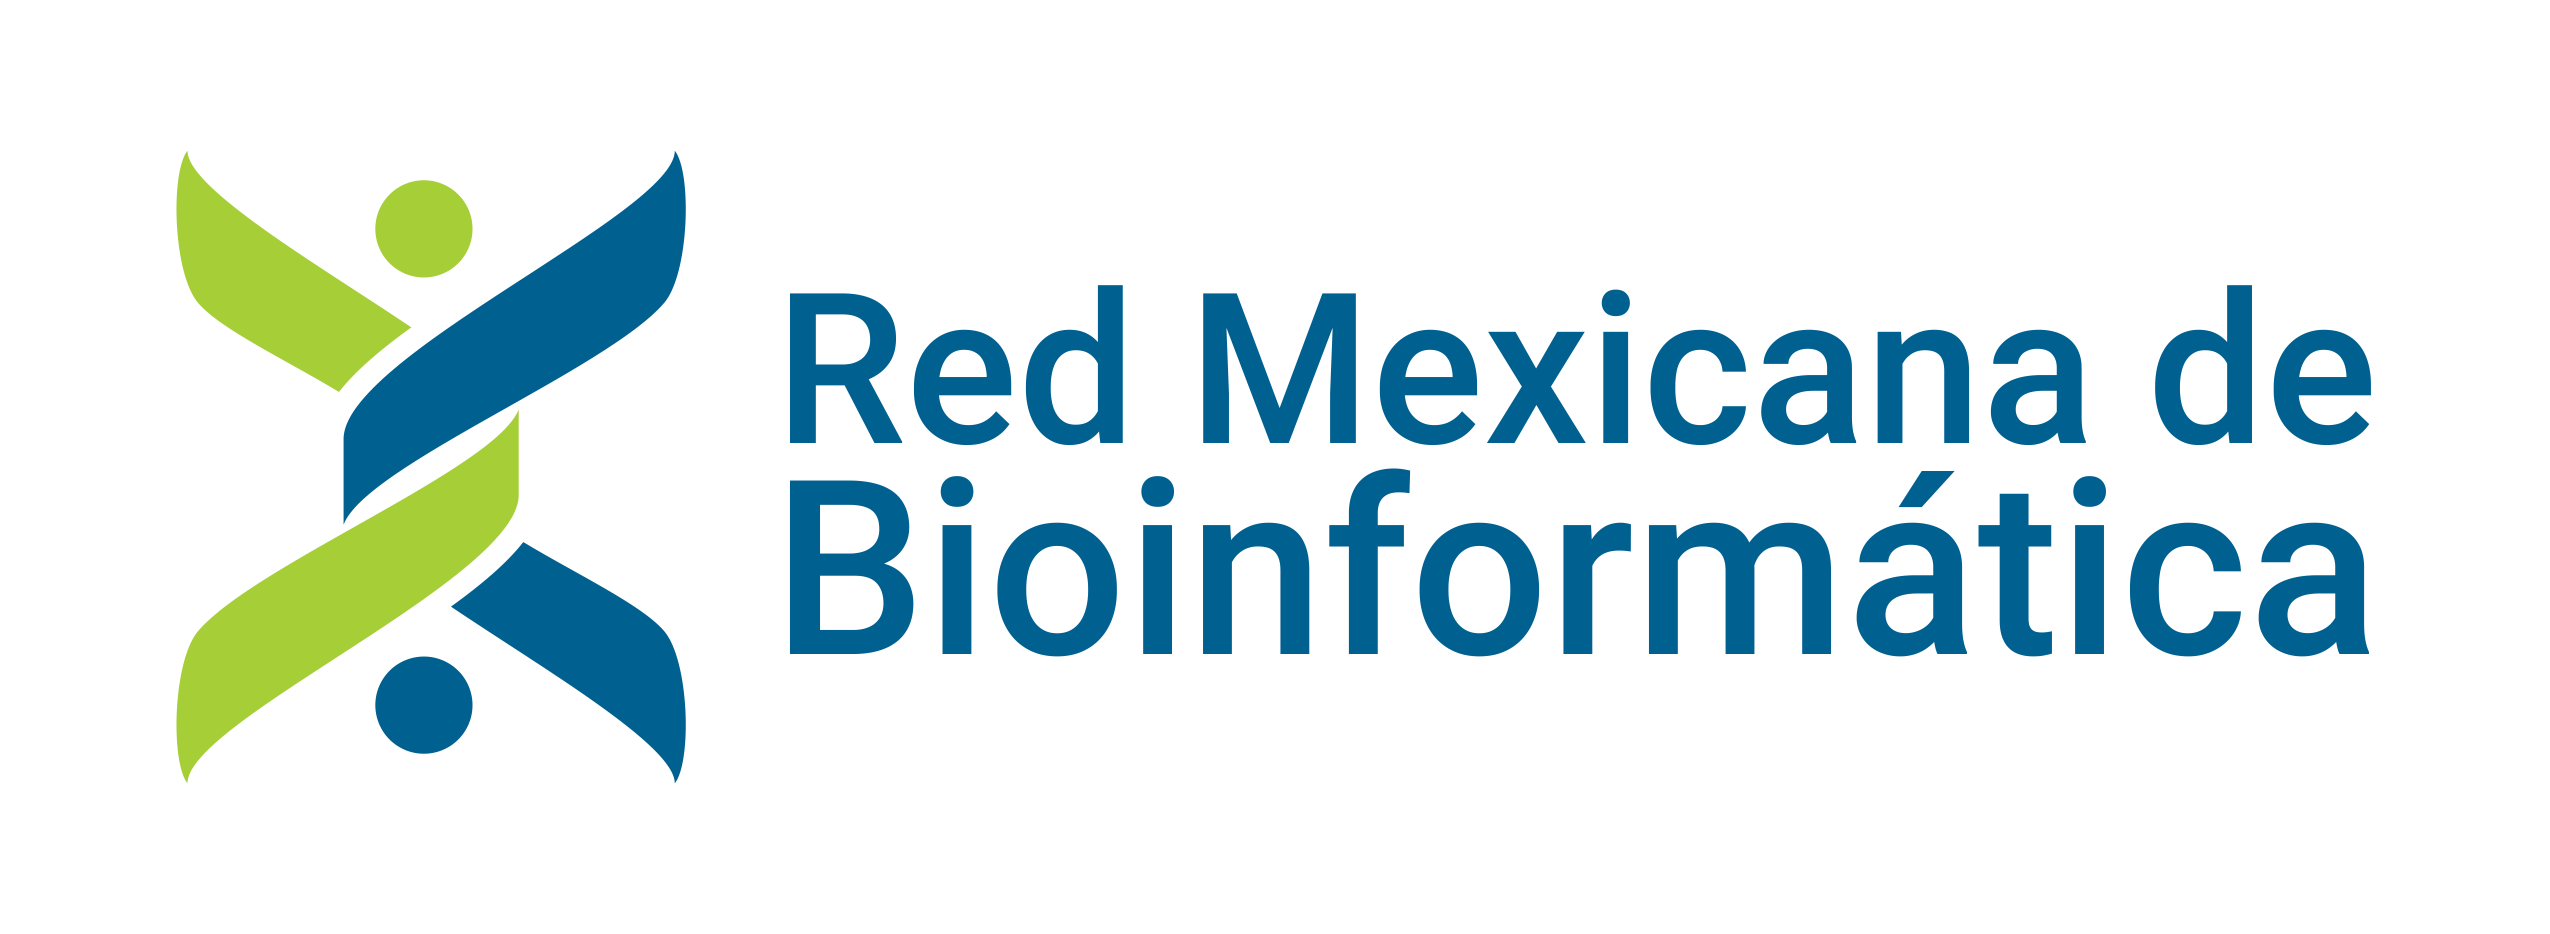 red-mexicana